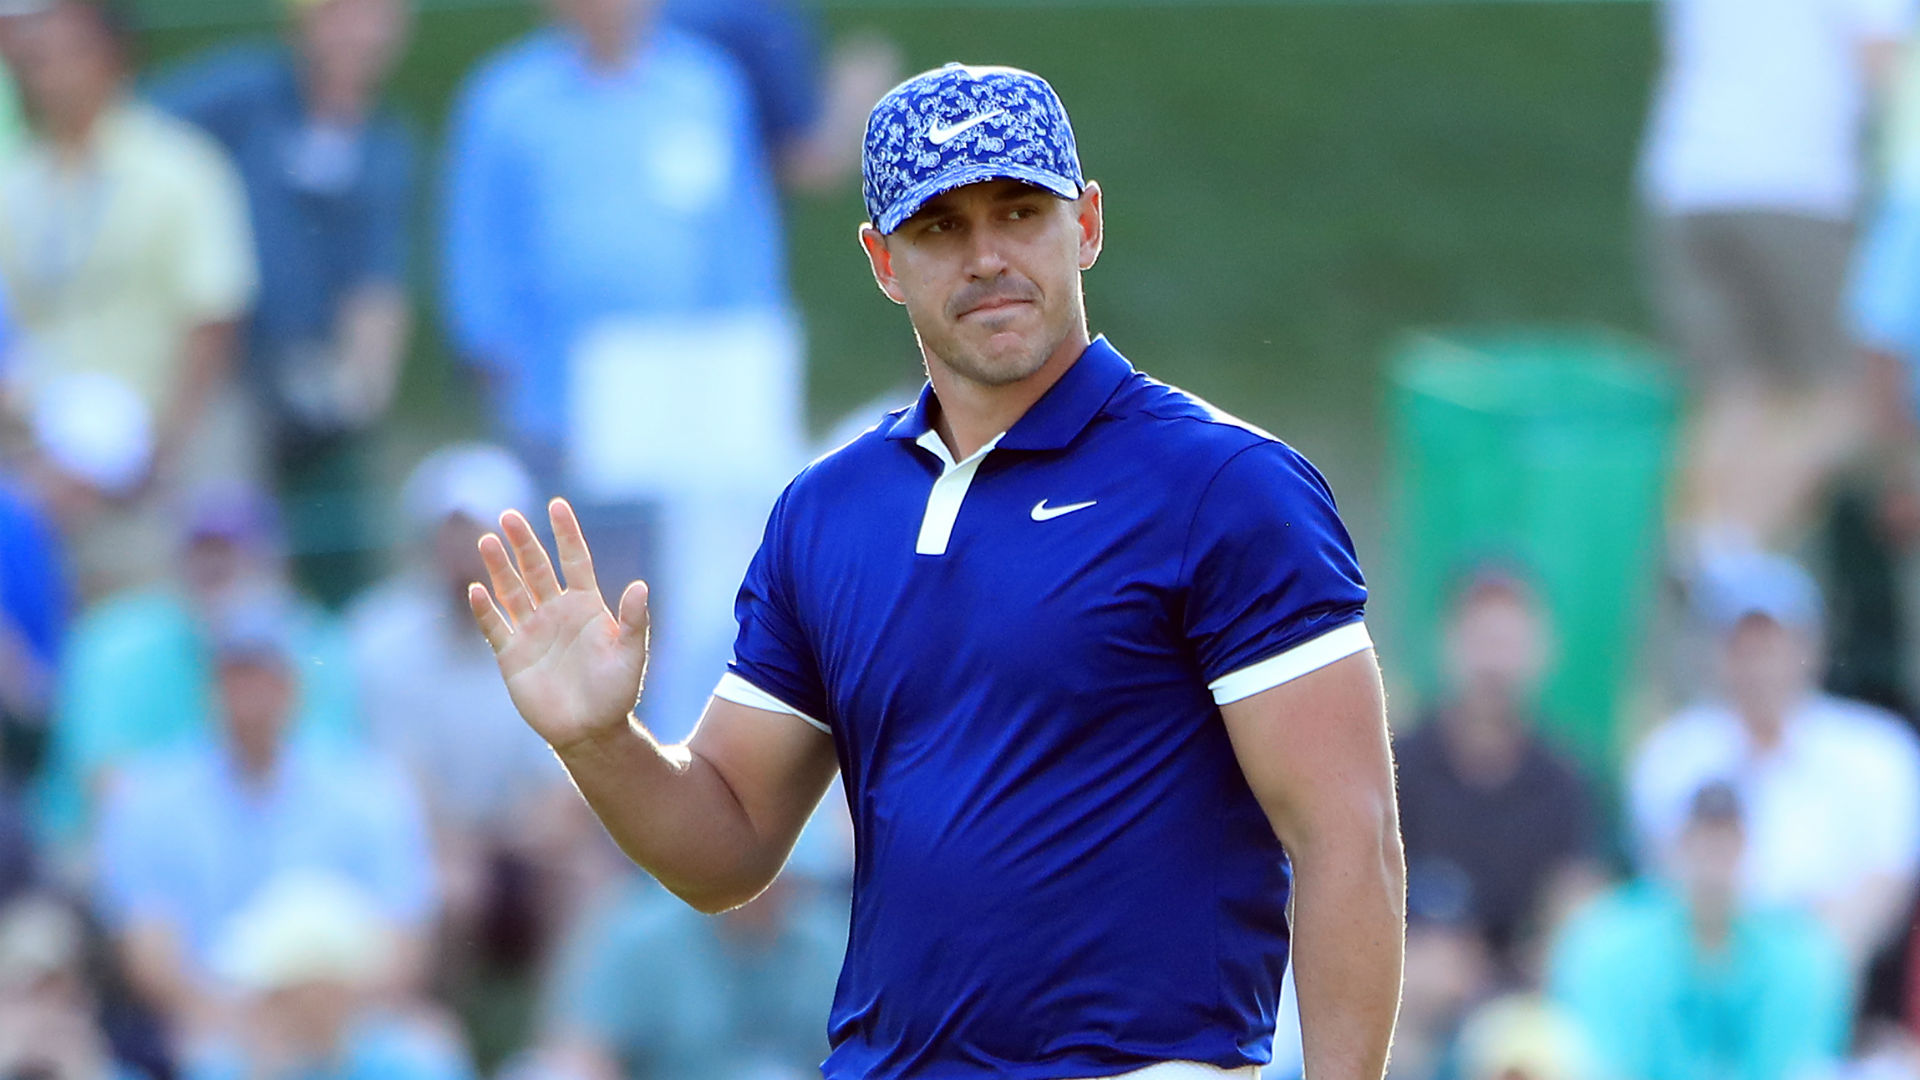 The Masters 2019 Coleader Brooks Koepka answers weightloss critics